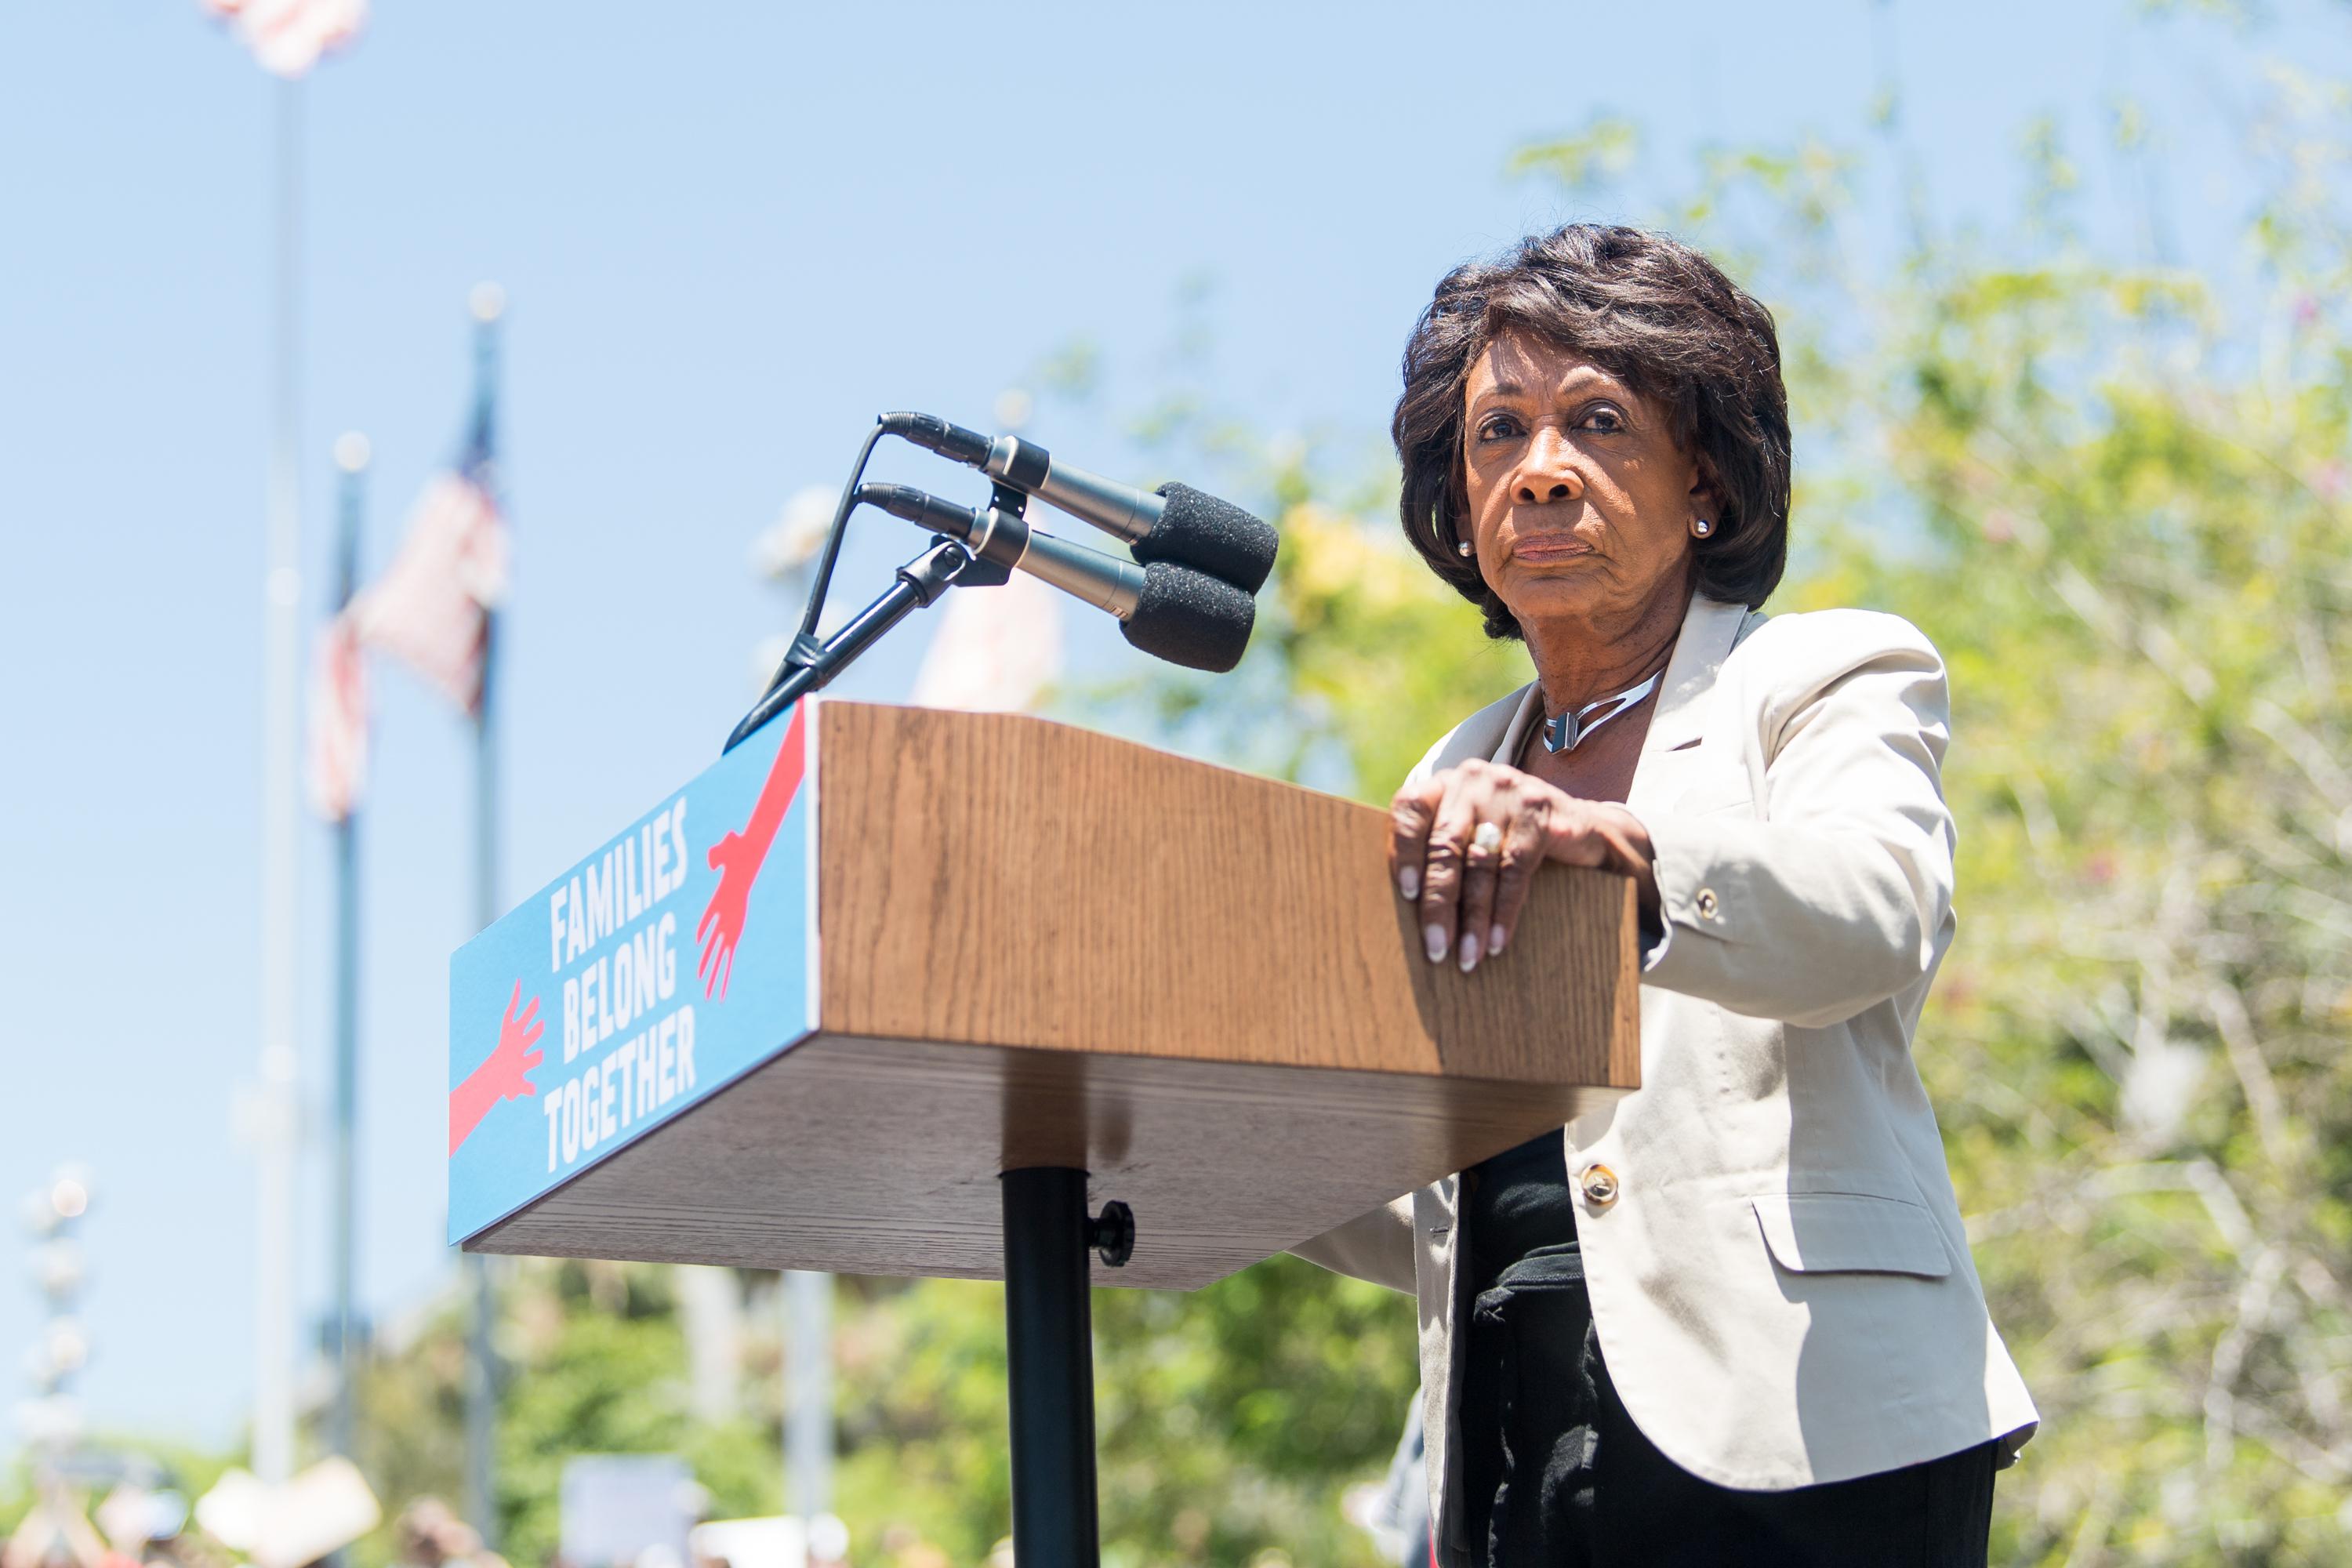 Maxine Waters speaks onstage at the Families Belong Together rally in Los Angeles on June 30, 2018.